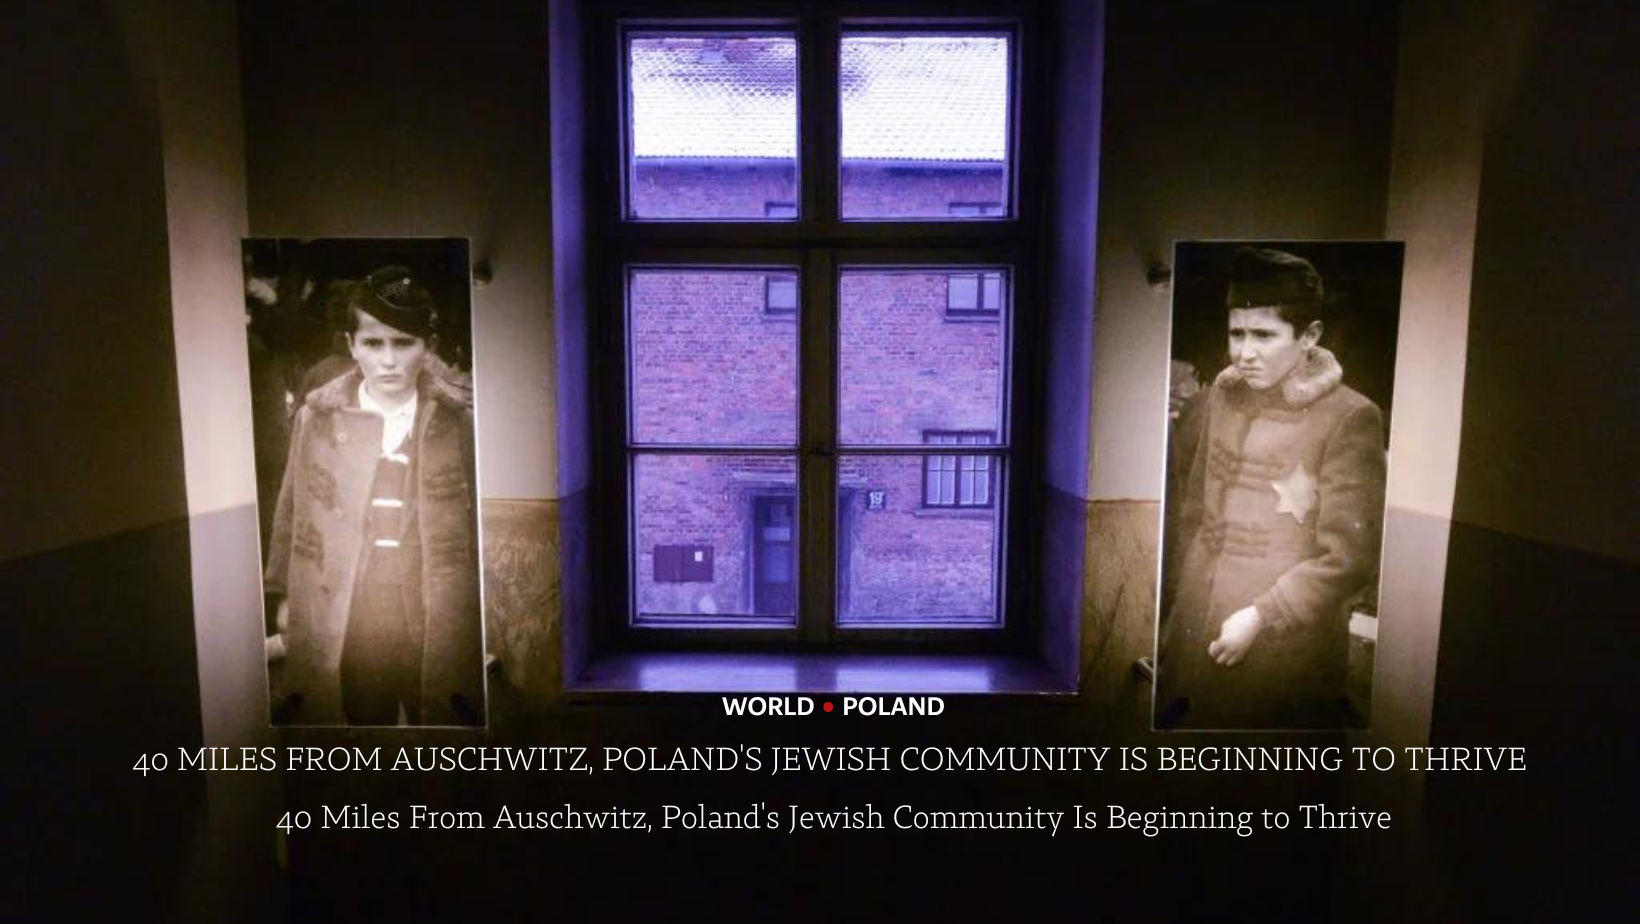 WORLD POLAND 40 MILES FROM AUSCHWITZ, POLAND'S JEWISH COMMUNITY IS BEGINNING TO THRIVE 40 Miles From Auschwitz, Poland's Jewish Community Is Beginning to Thrive.png